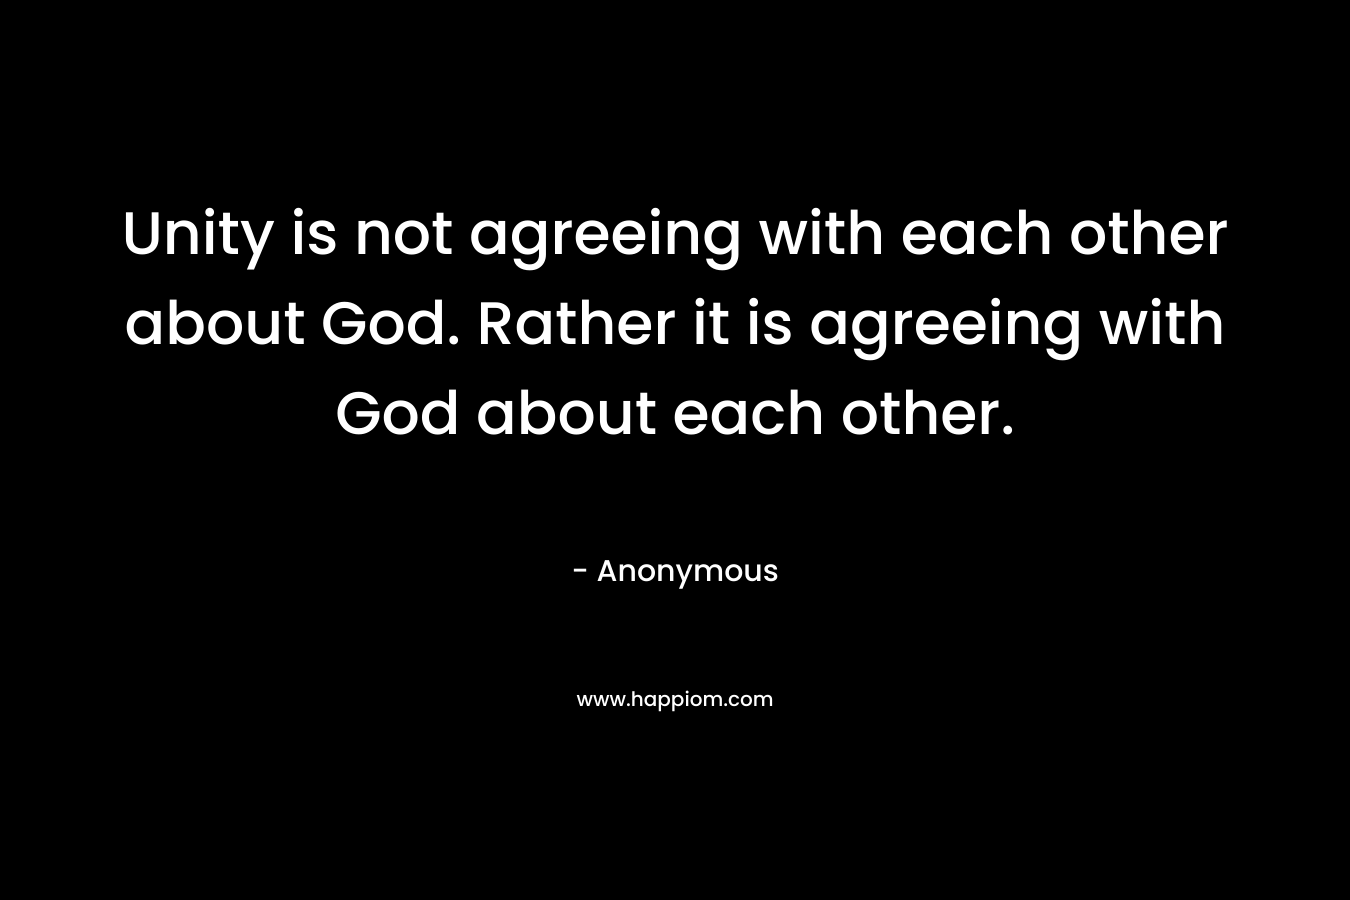 Unity is not agreeing with each other about God. Rather it is agreeing with God about each other. – Anonymous